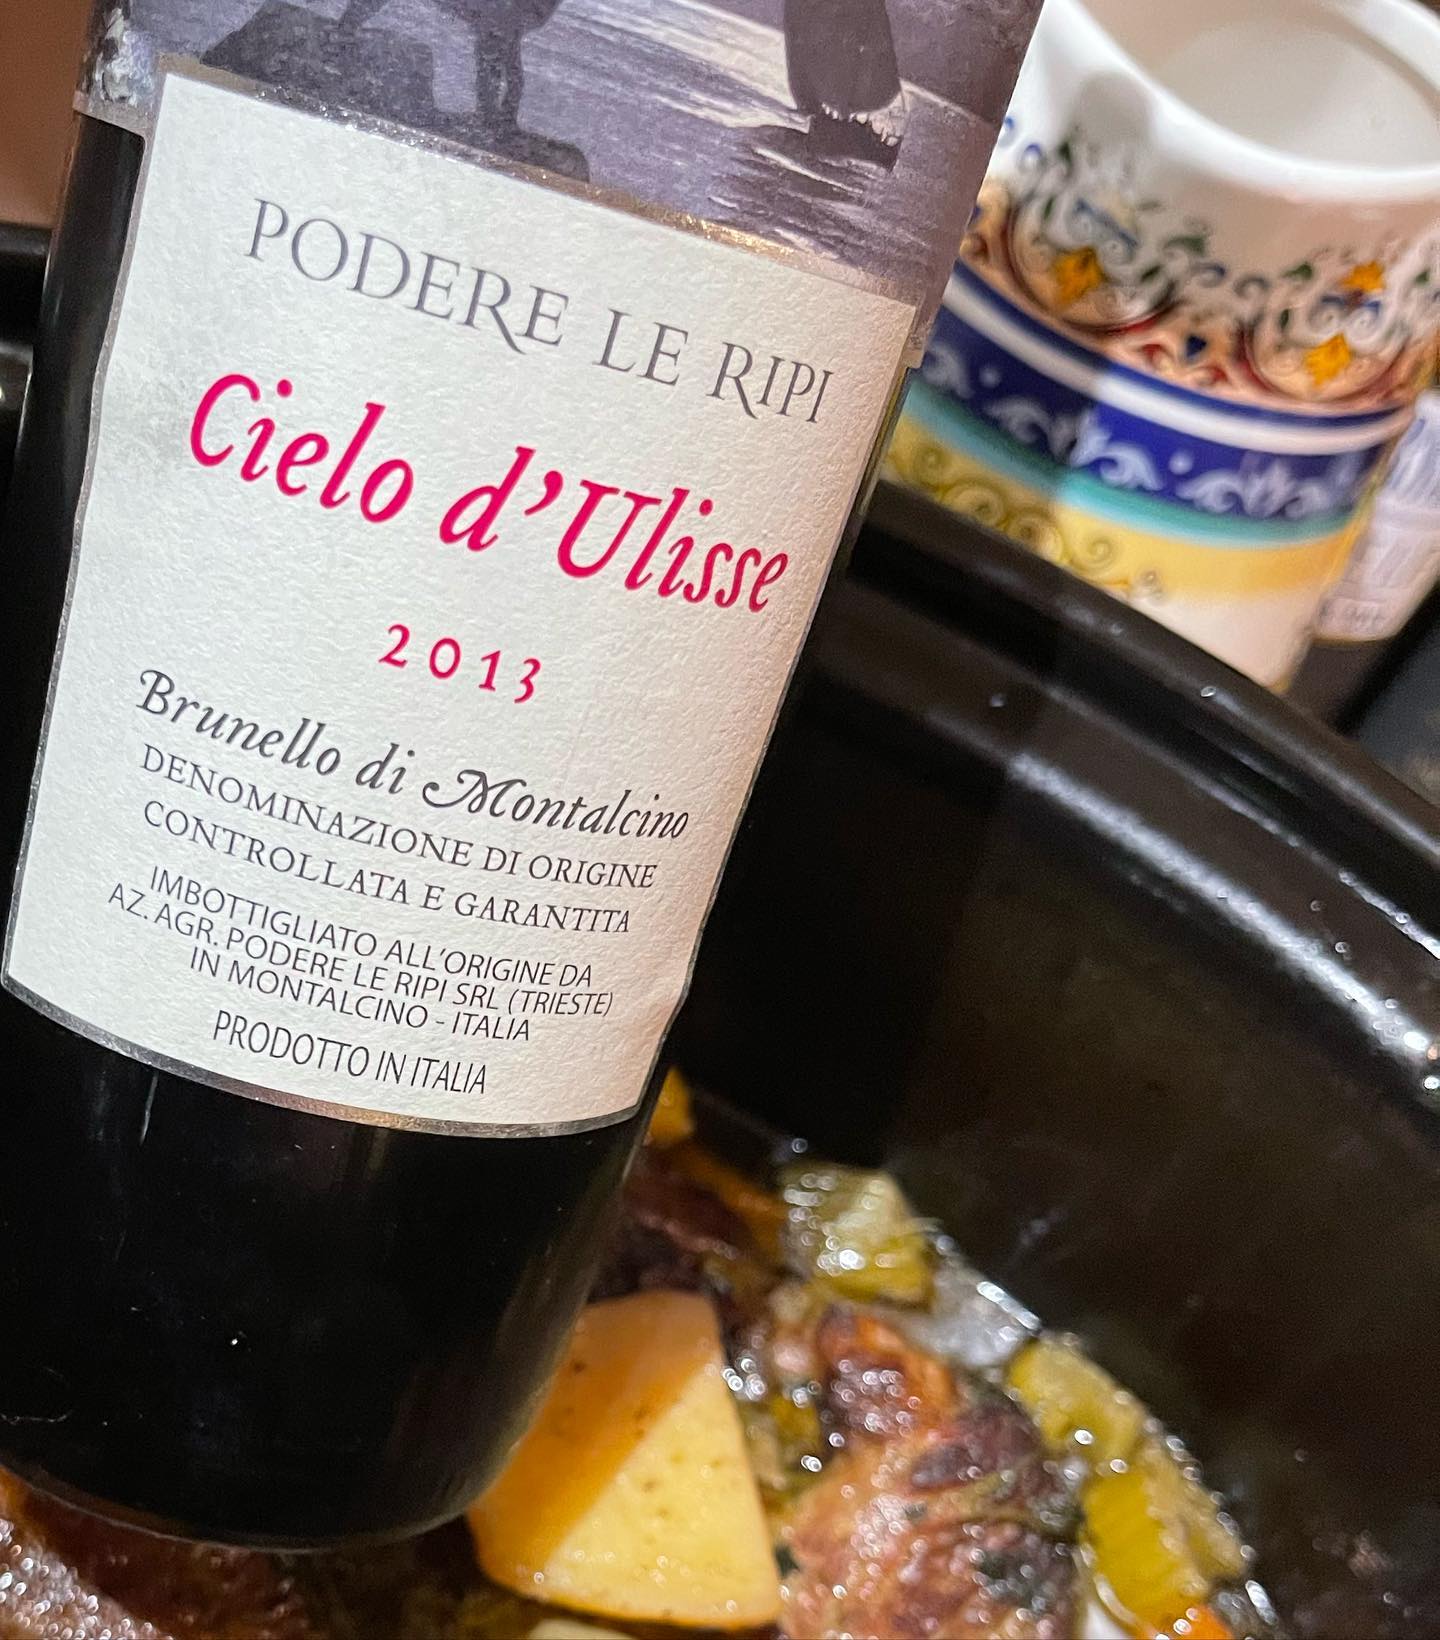 The new 2017 Brunello @podereleripi and 2016 Brunello Riserva are just 2 weeks away from landing. In the meanwhile we try the magnificent 2013 Cielo di Ulisse: translucent and balsamic.
Paired with a very slow cooking brisket. Heaven!
#toscana #italianwine #bio #biodynamicwine #nzrestaurant #foodandwine